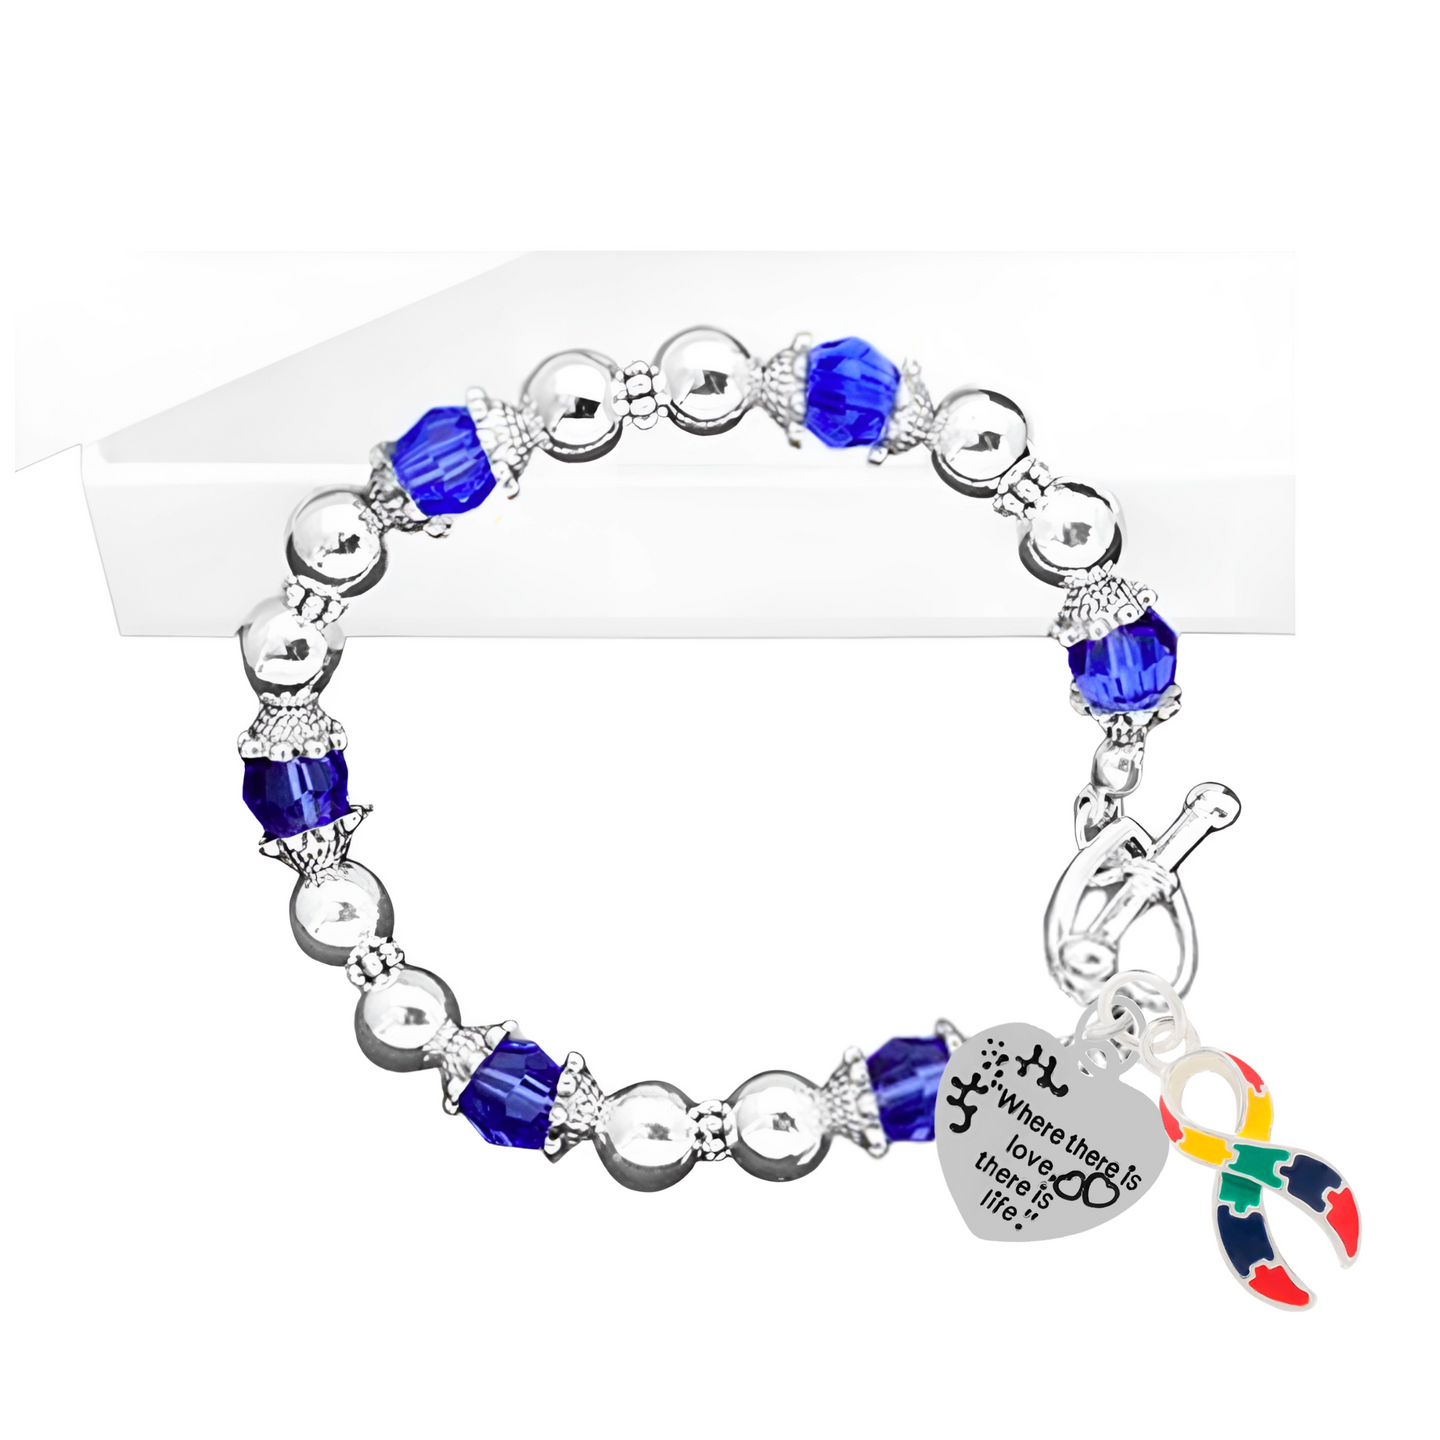 Where There Is Love Autism Ribbon Bracelets - Fundraising For A Cause